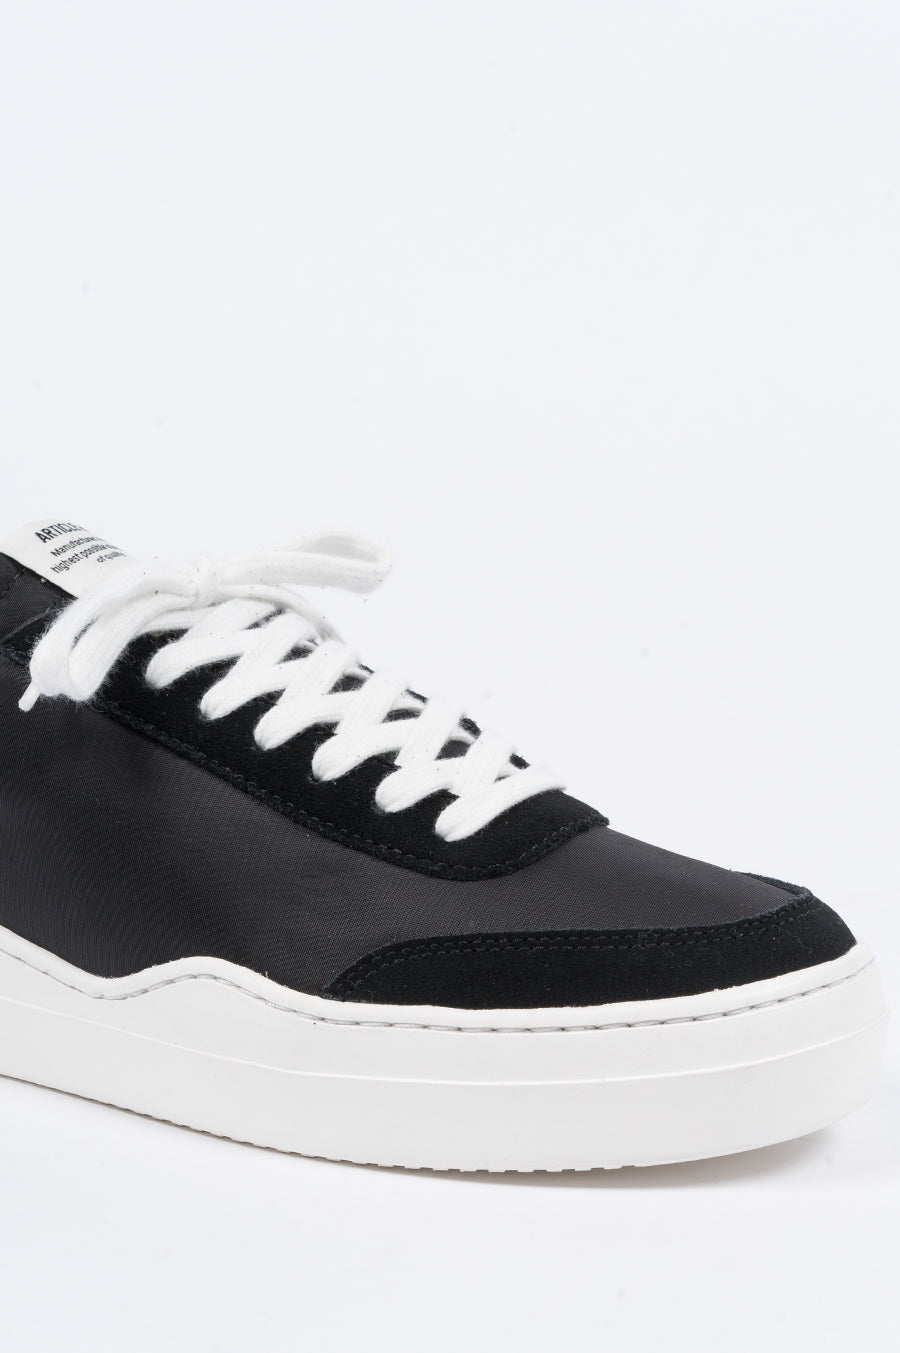 ARTICLE NUMBER 0517 CUPSOLE TRAINER BLACK WHITE - BLENDS